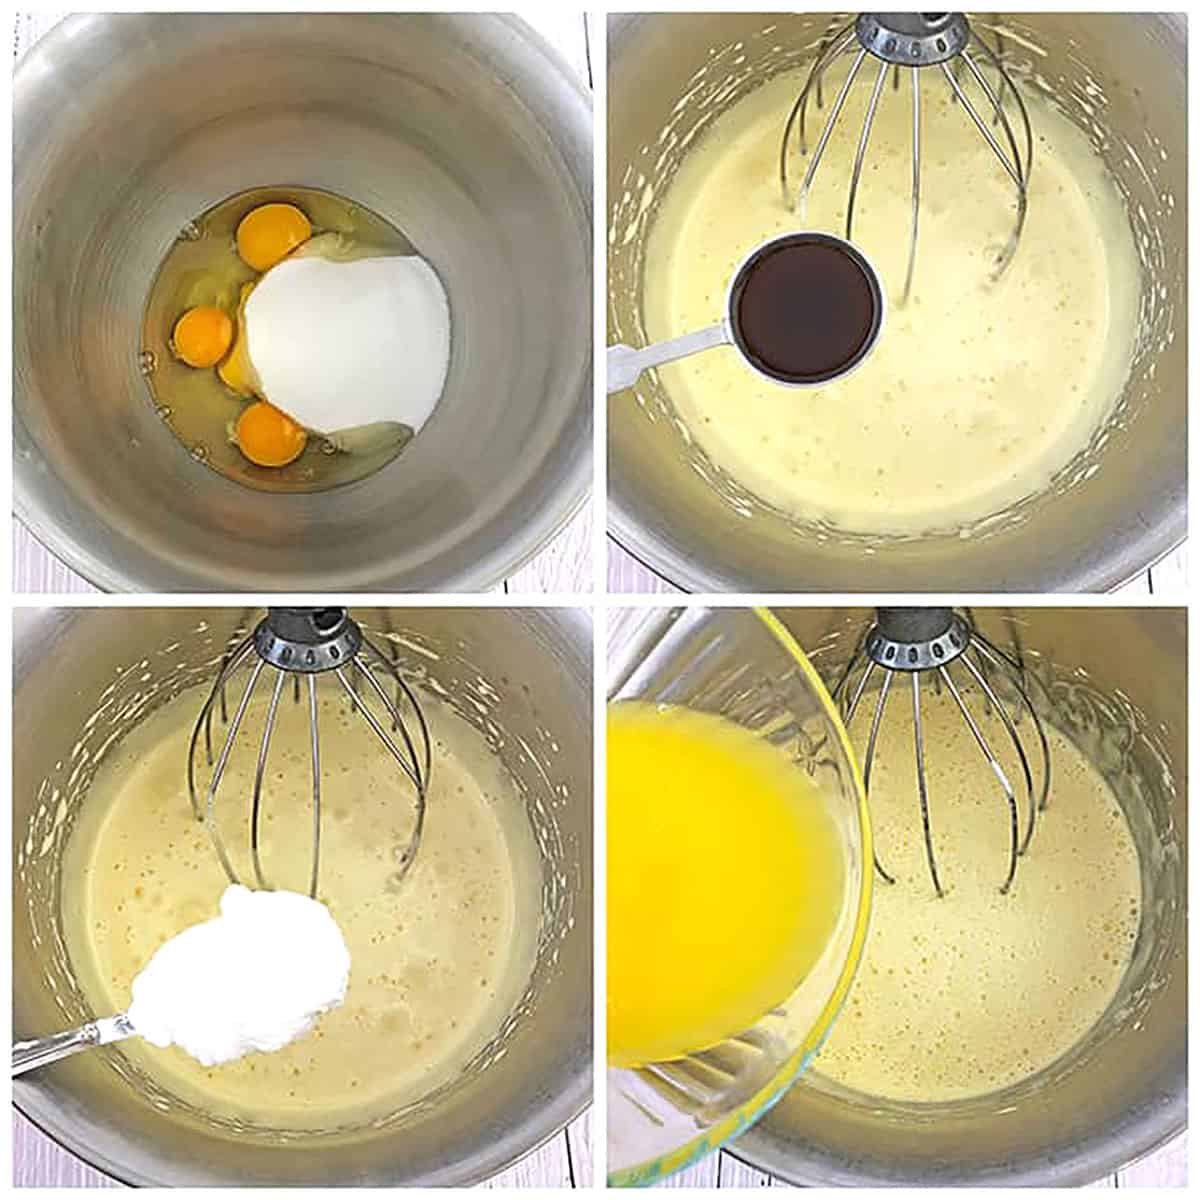 Beat eggs and sugar together on high for 5 minutes with a stand mixer.